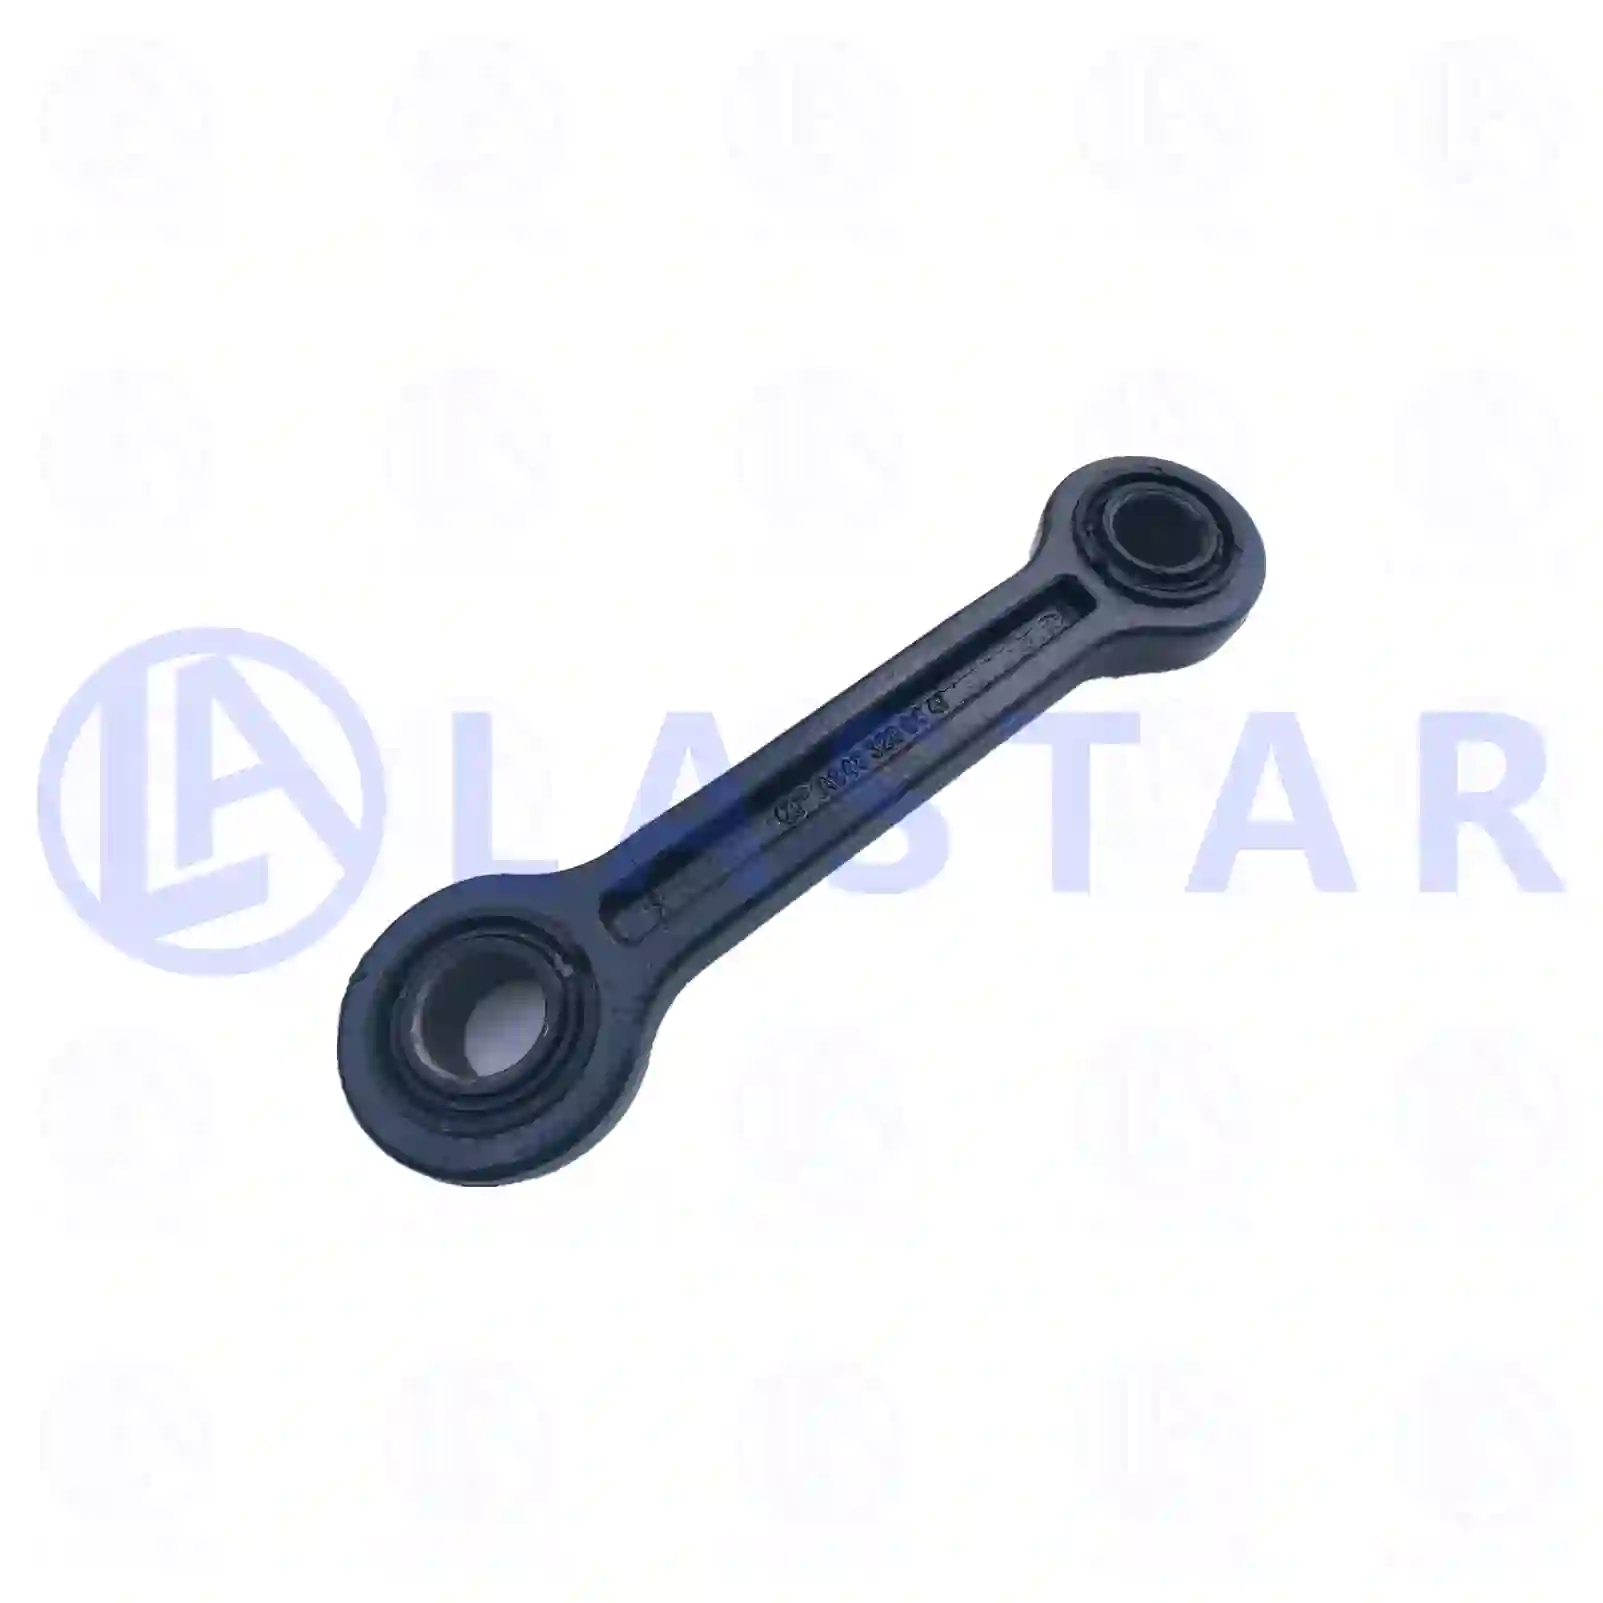 Connecting rod, stabilizer, 77727896, 9483260447 ||  77727896 Lastar Spare Part | Truck Spare Parts, Auotomotive Spare Parts Connecting rod, stabilizer, 77727896, 9483260447 ||  77727896 Lastar Spare Part | Truck Spare Parts, Auotomotive Spare Parts